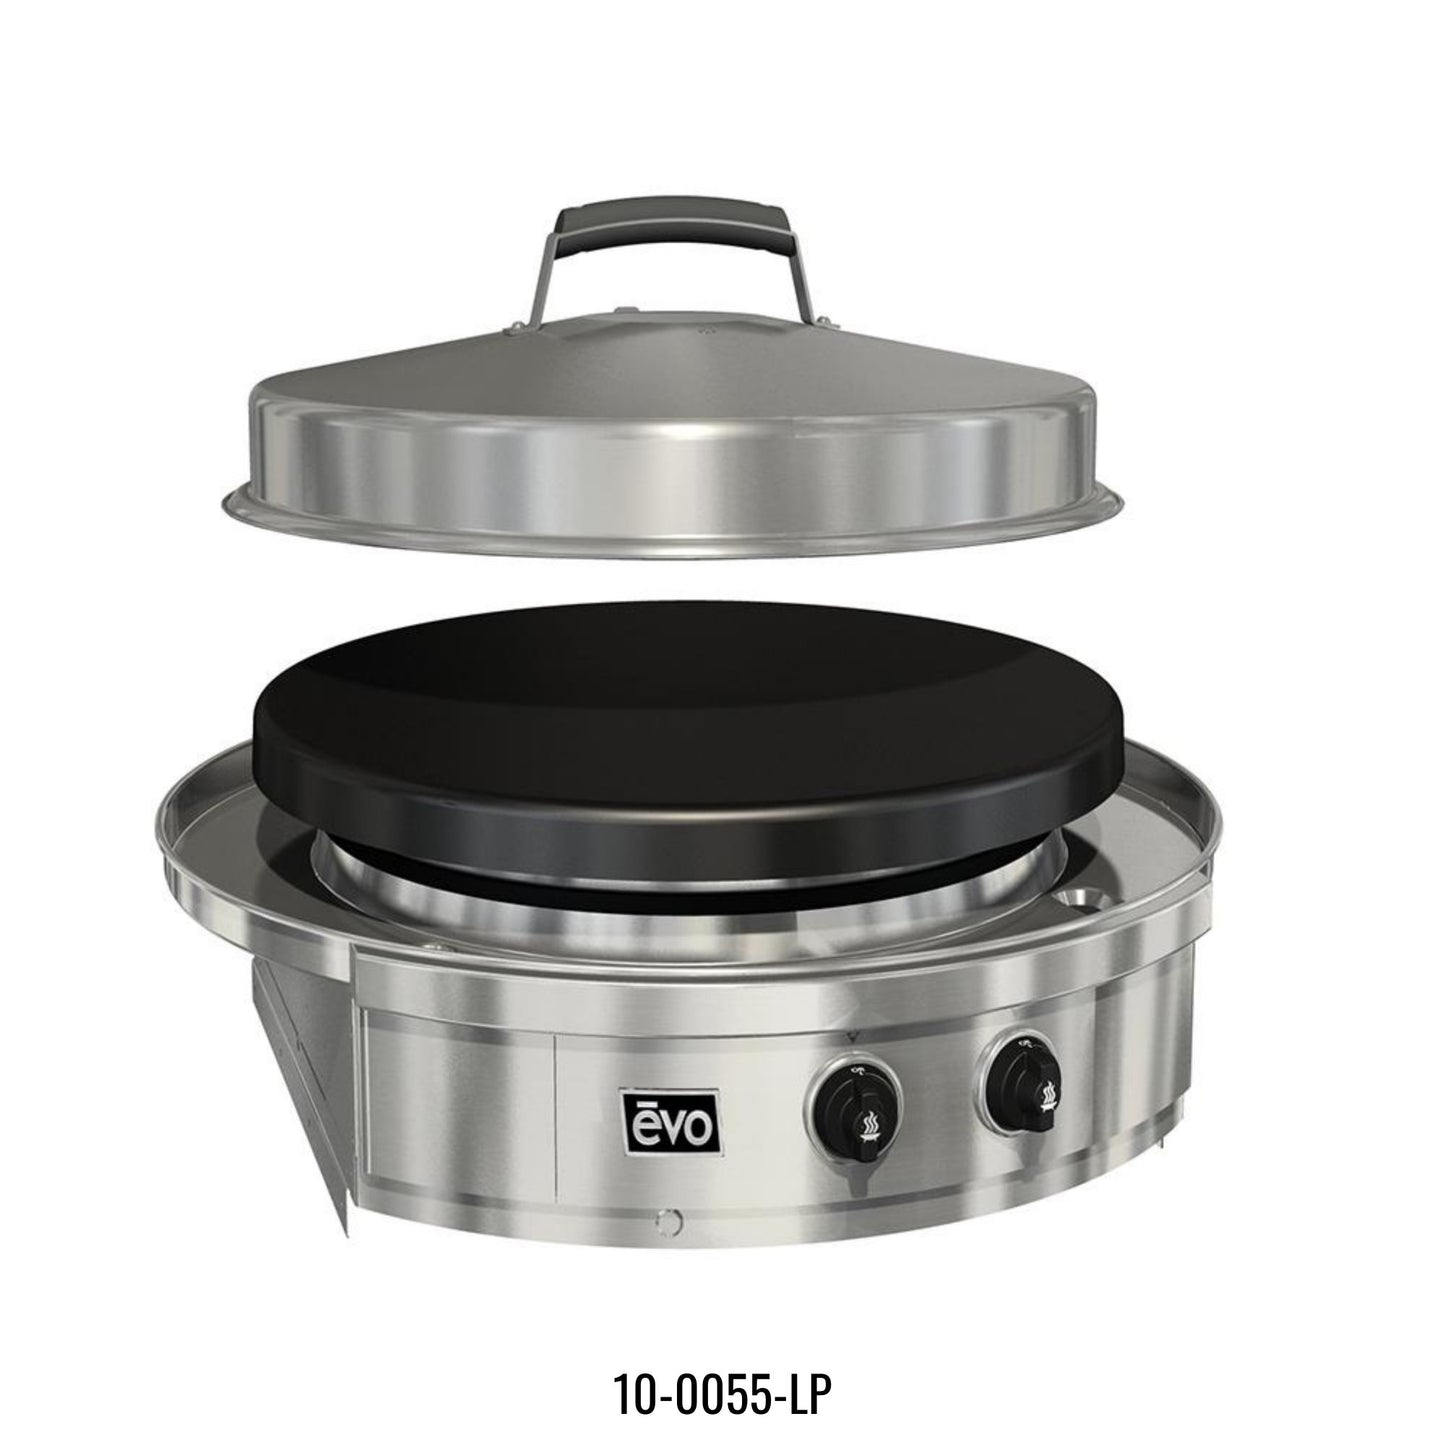 EVO AFFINITY 30G DROP-IN WITH SEASONED COOKSURFACE LP GAS - FULLY ASSEMBLED FOR OUTDOOR USE